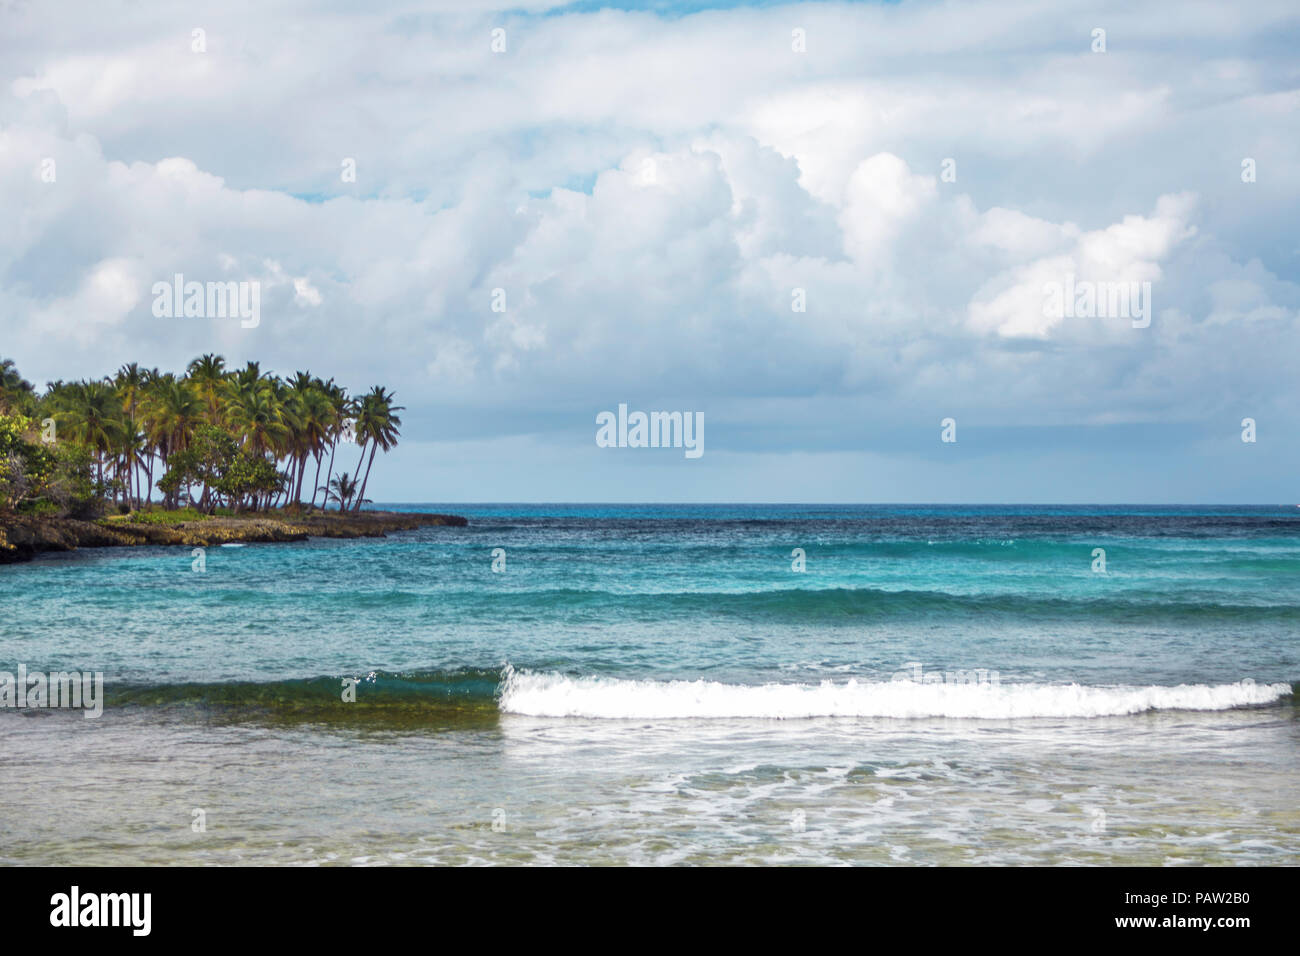 seascape in Samana, Dominican Republic. Sea, shore with palm trees and sky with storm clouds Stock Photo